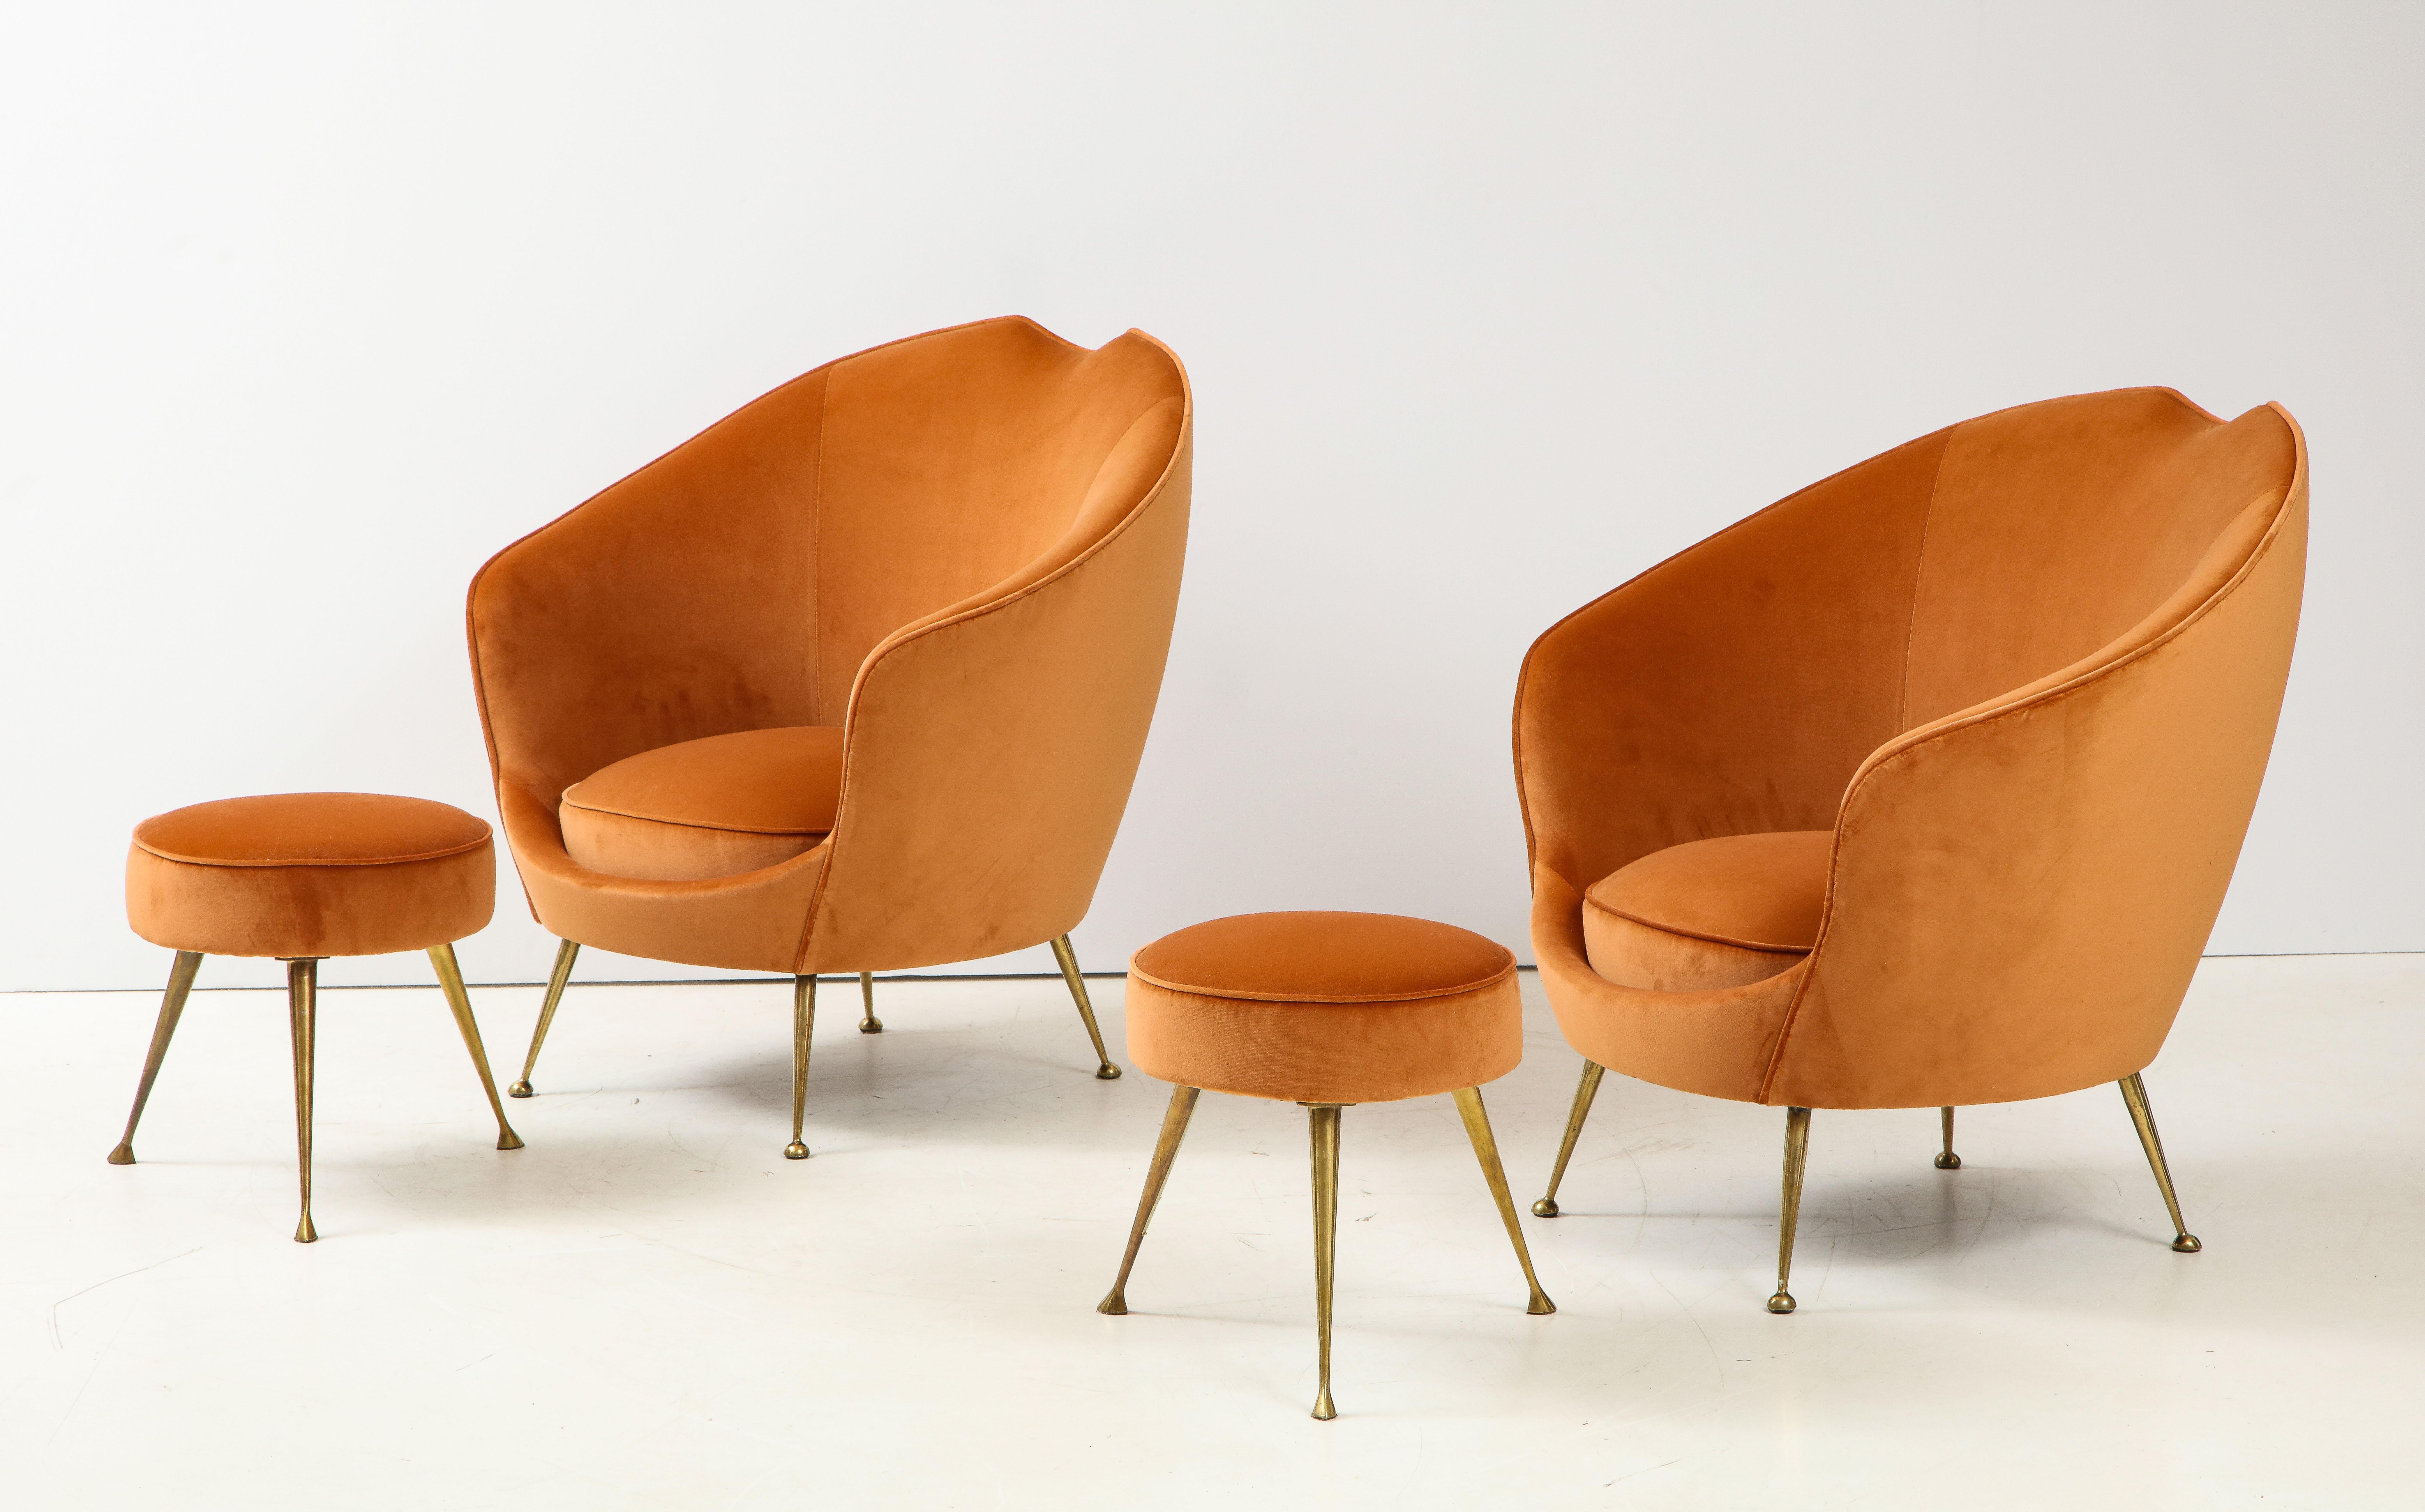 A beautiful pair of restored sculptural form Italian lounge chairs dating from the early 1950s with handcrafted wood frames. The curvaceous shape of the chair is complemented by the slope in the mid-section of the backrest. The tapered and angled